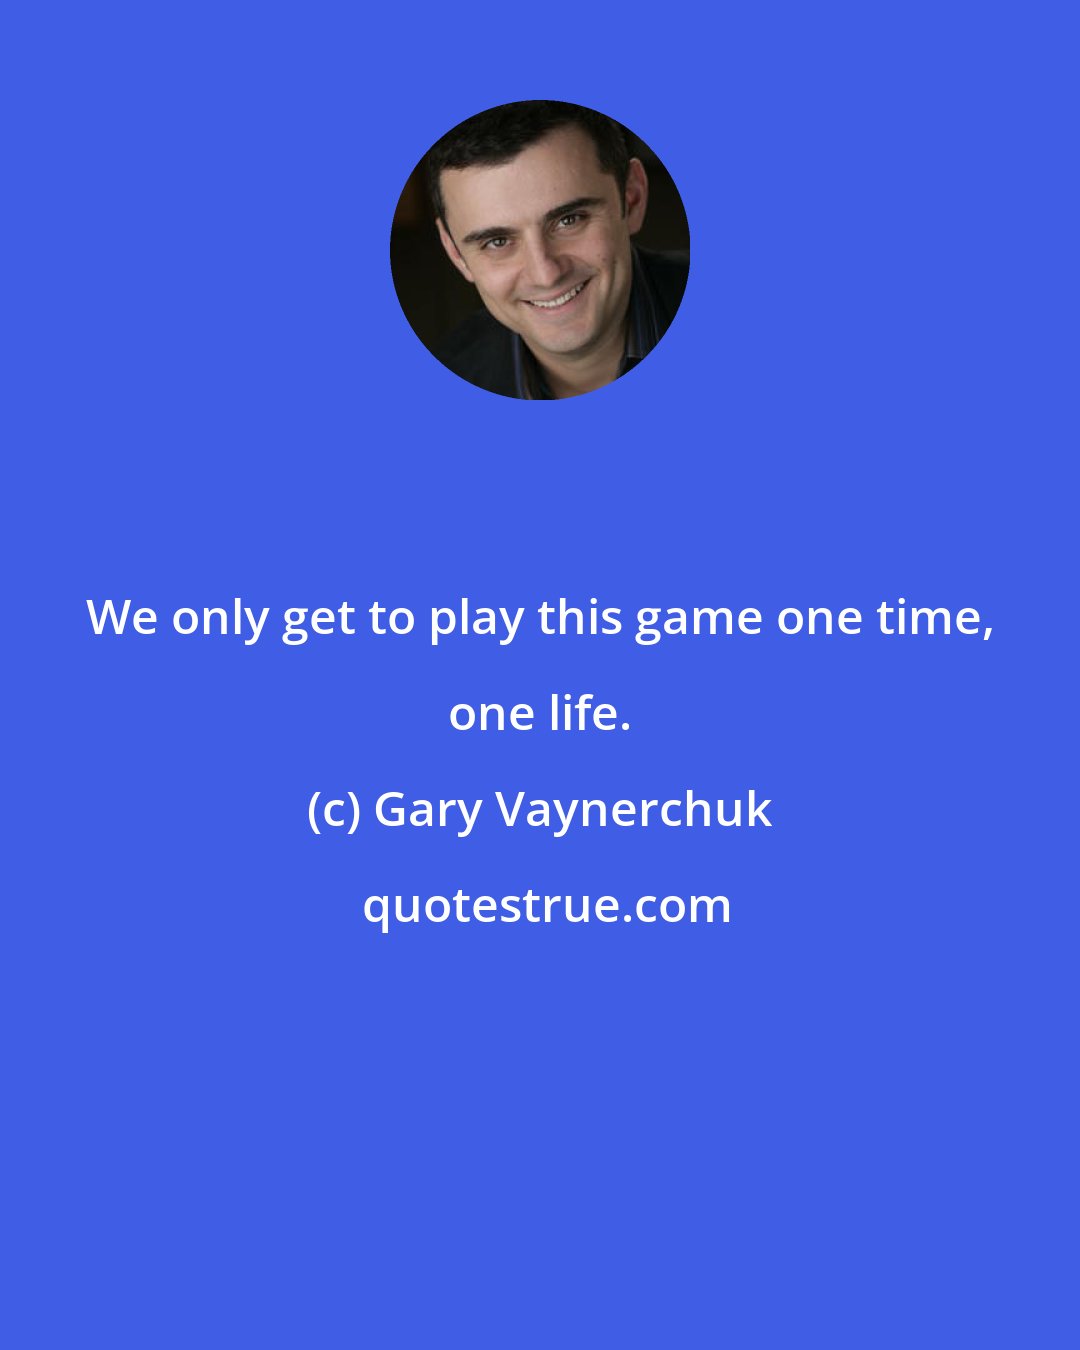 Gary Vaynerchuk: We only get to play this game one time, one life.